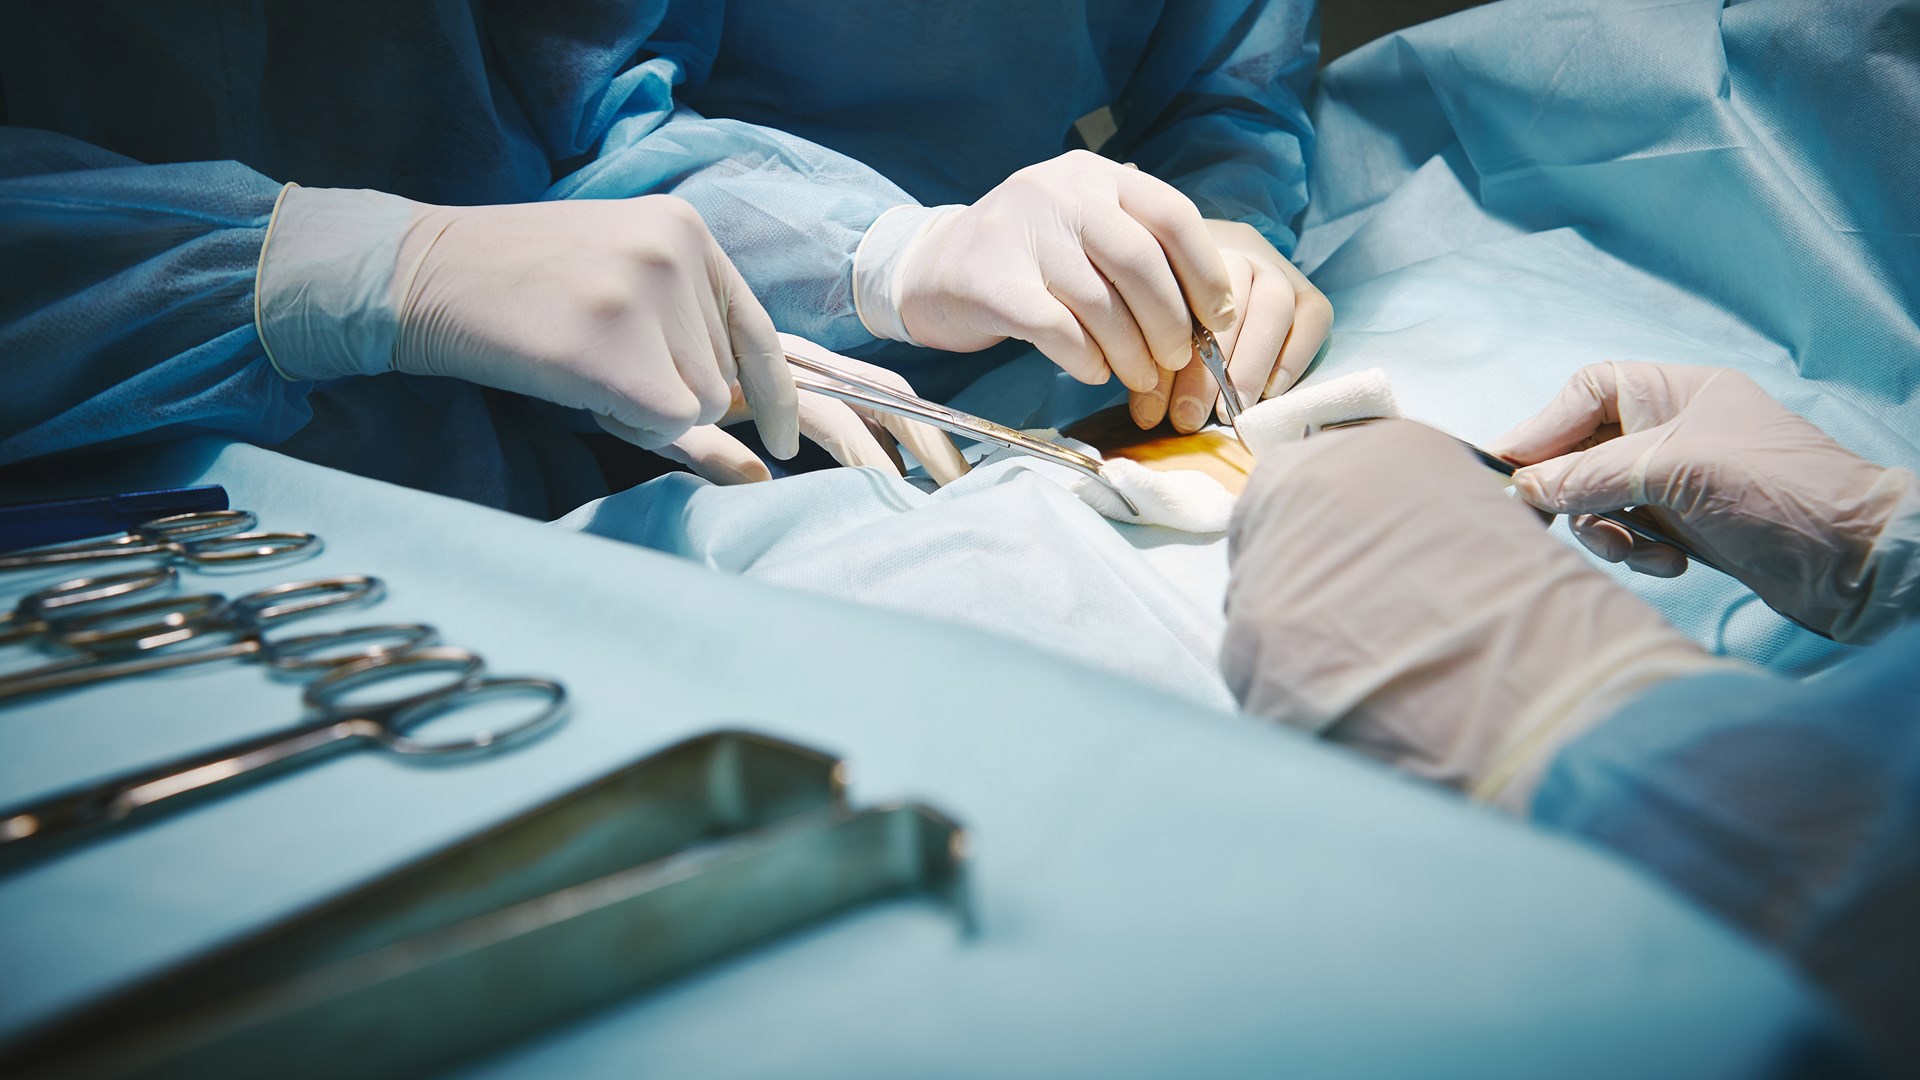 Surgical Departments: Enroll in THIRD Trial to Improve Inclusion and Well-Being